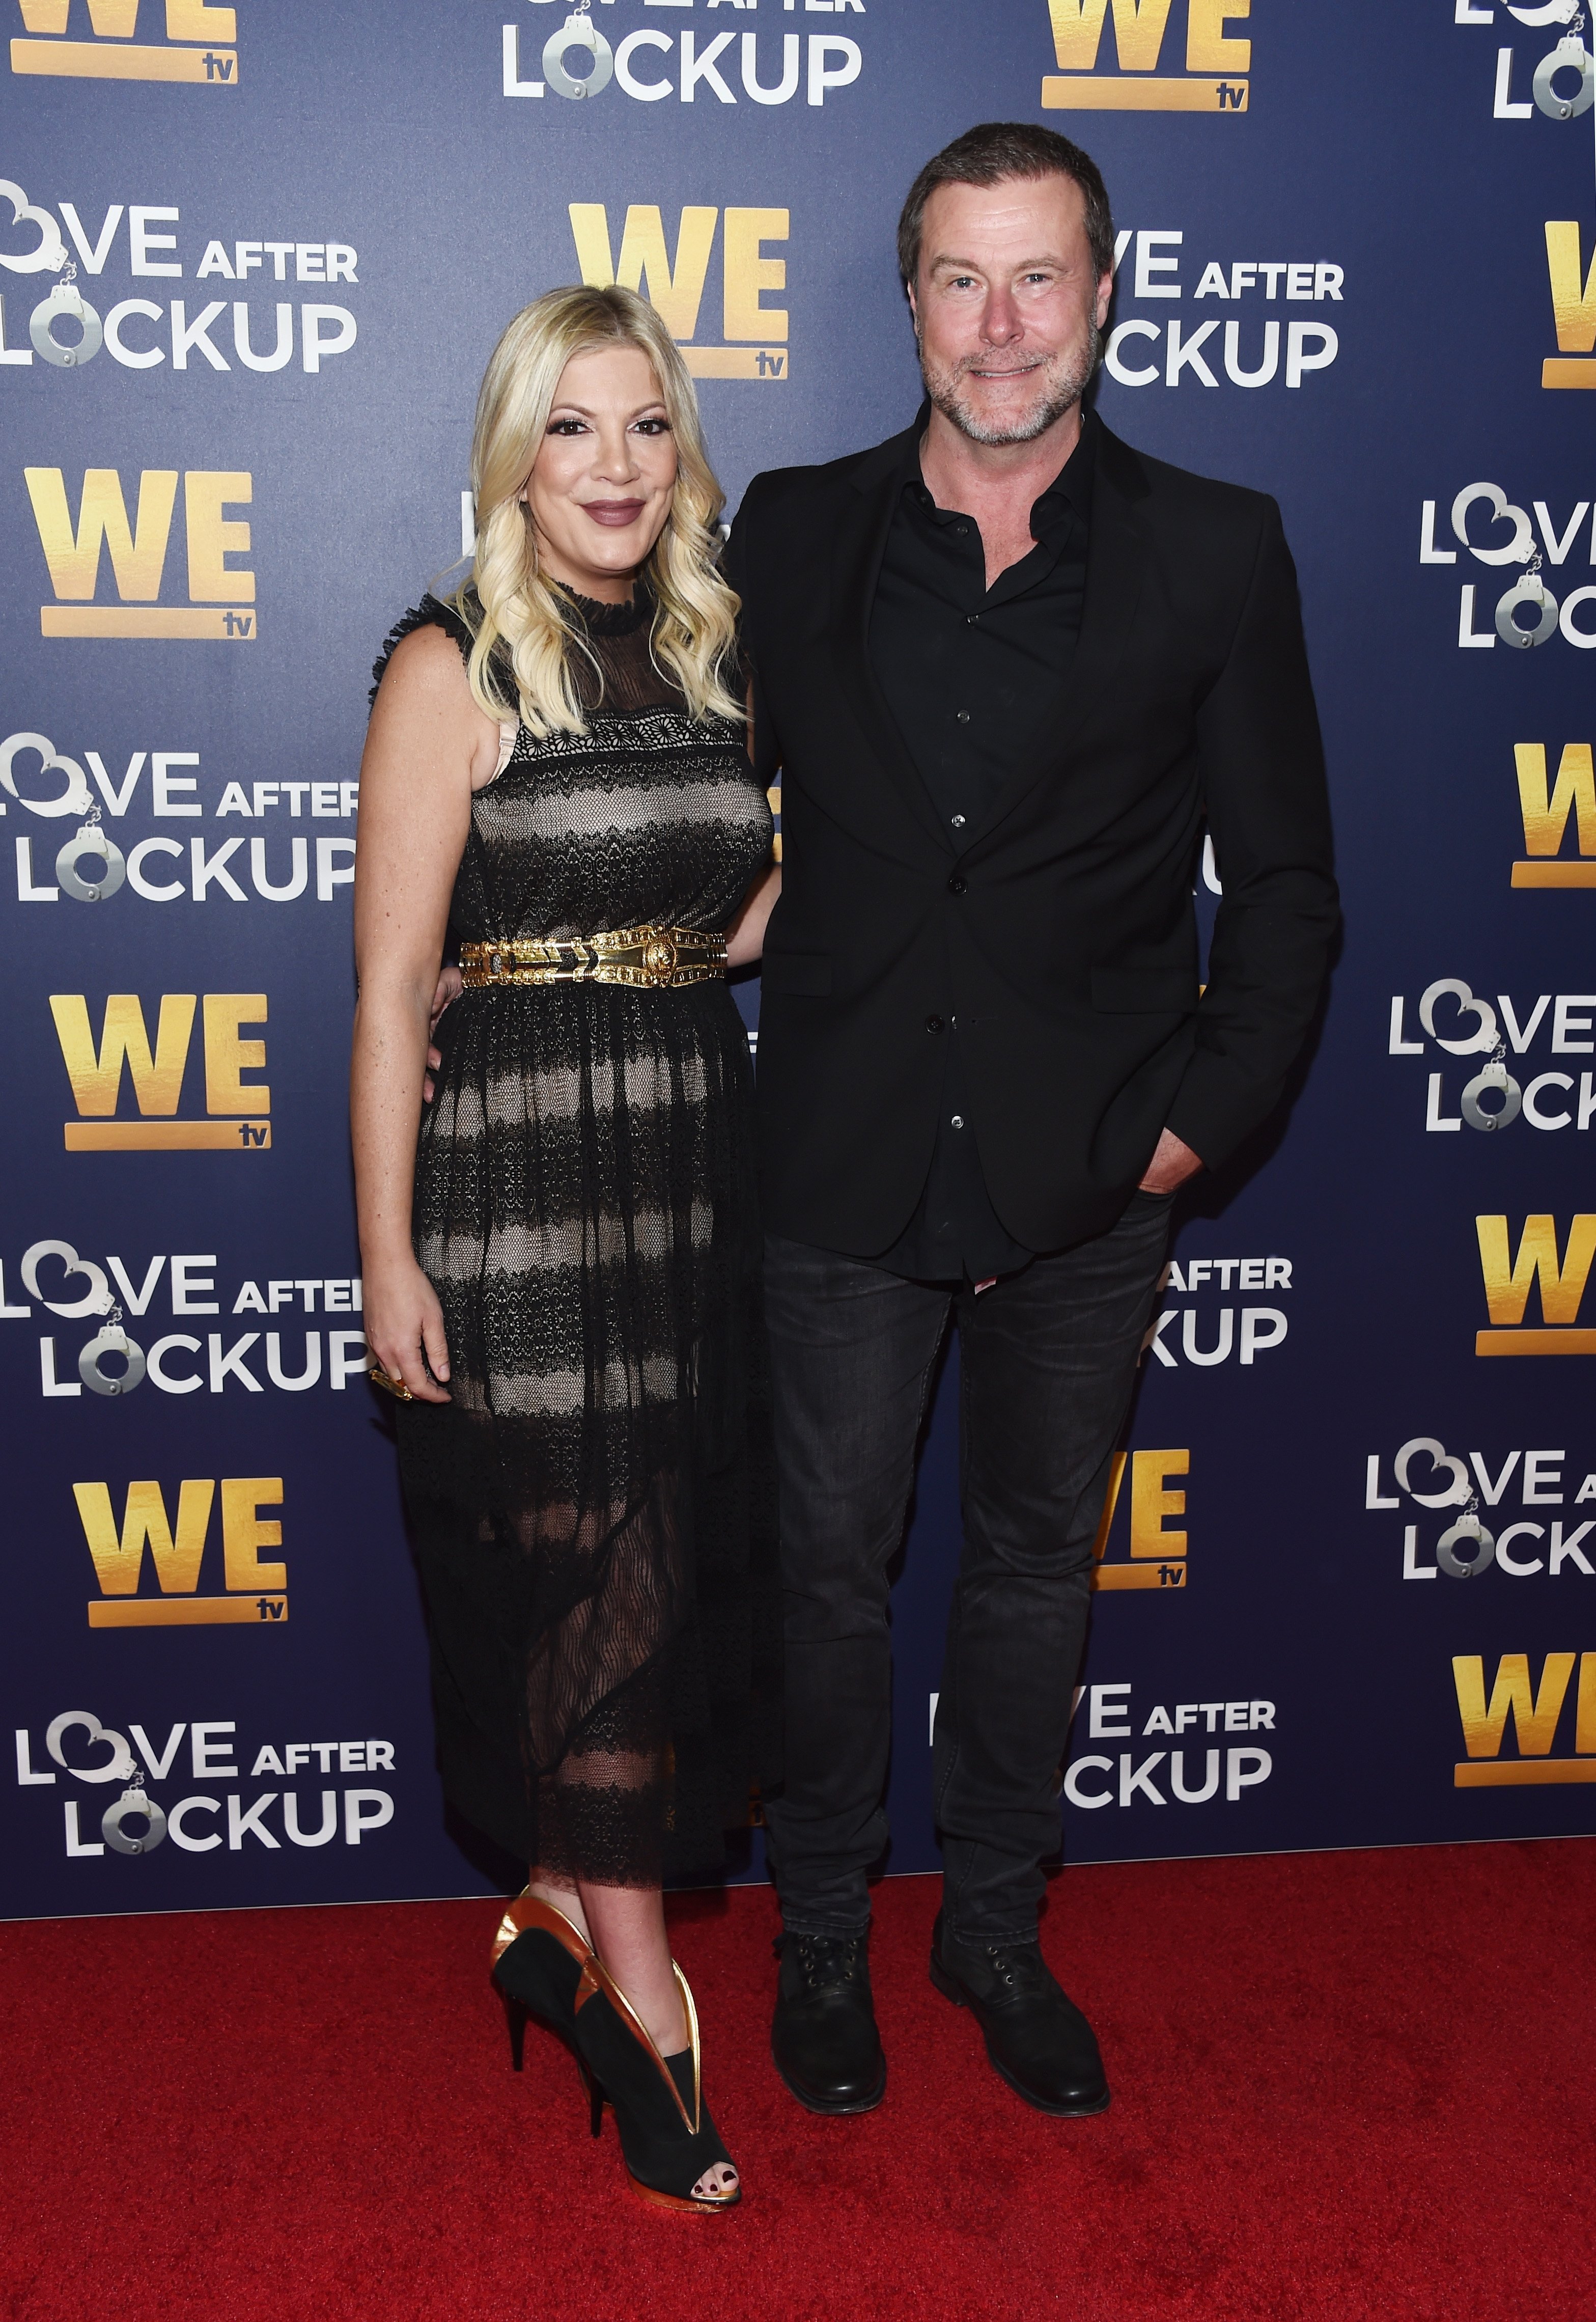 Tori Spelling and Dean McDermott attend Real Love: Relationship Reality TV's Past, Present & Future event in Beverly Hills, California | Photo: Getty Images